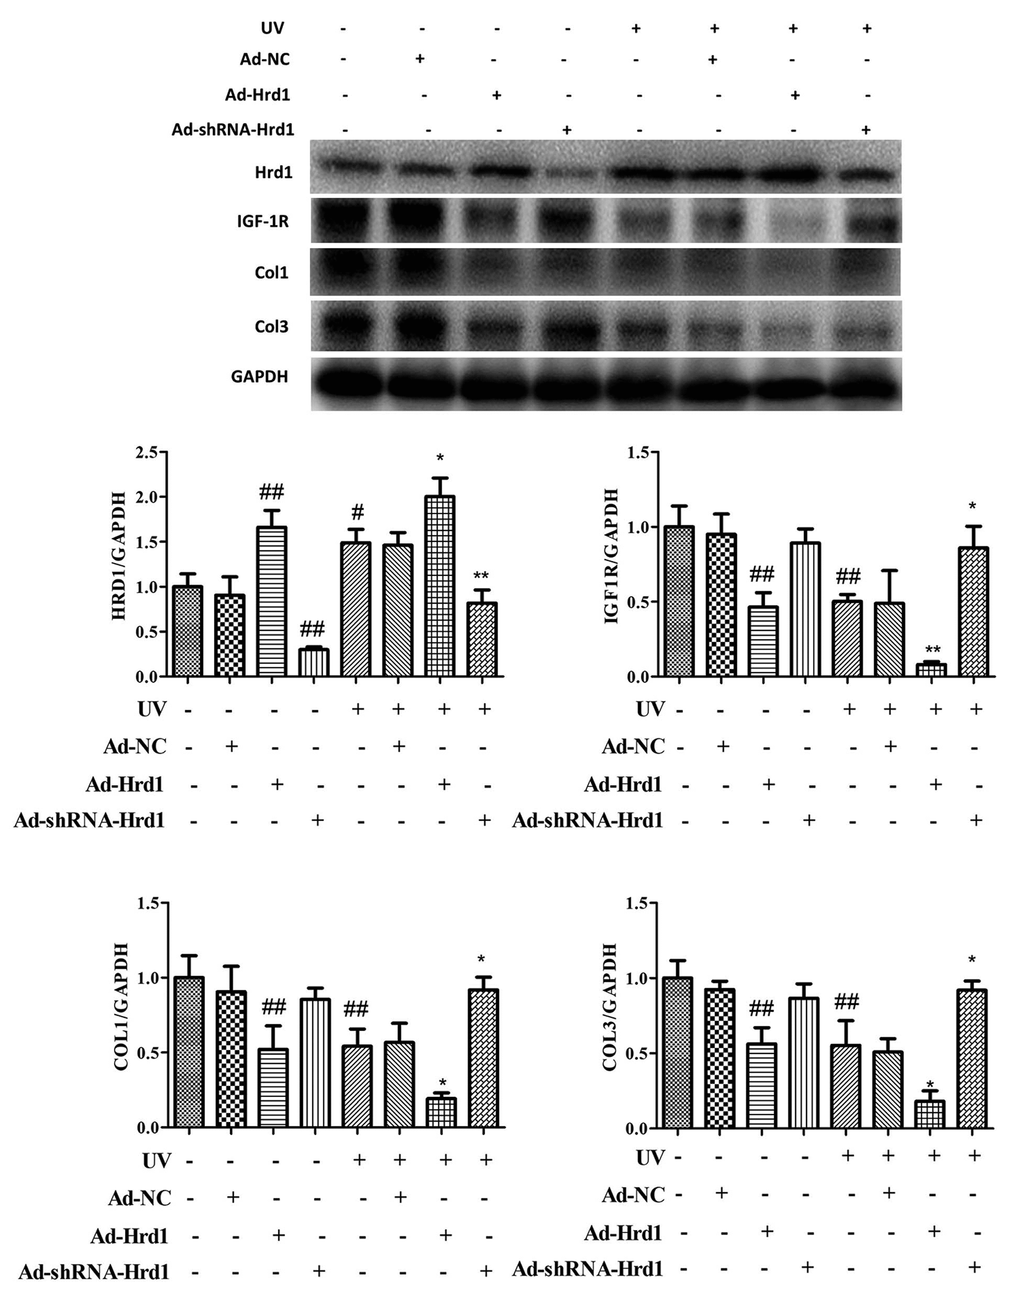 The effect of Hrd1 transfection on the protein expressions of Hrd1, IGF-1R, Type I collagen and Type III collagen by western blot in HSF cells. The results were presented as mean ± SD. ###